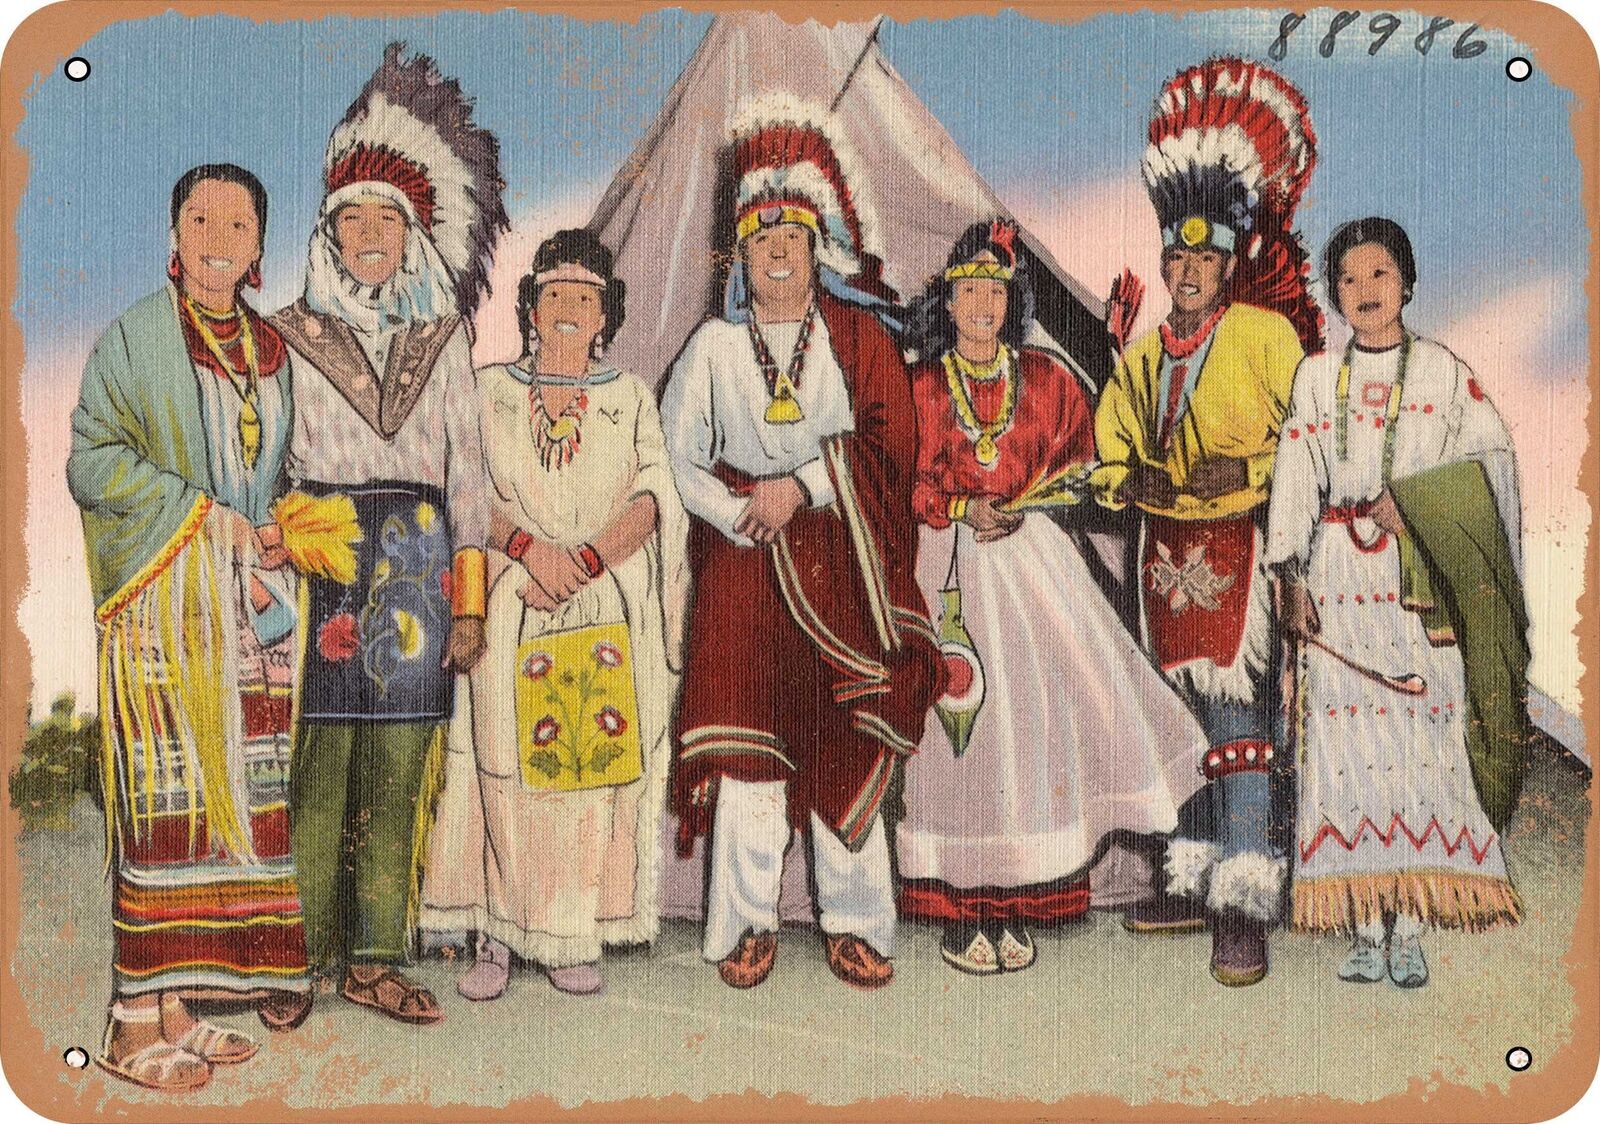 Metal Sign - Florida Postcard - A typical Group of West Plains first Americans